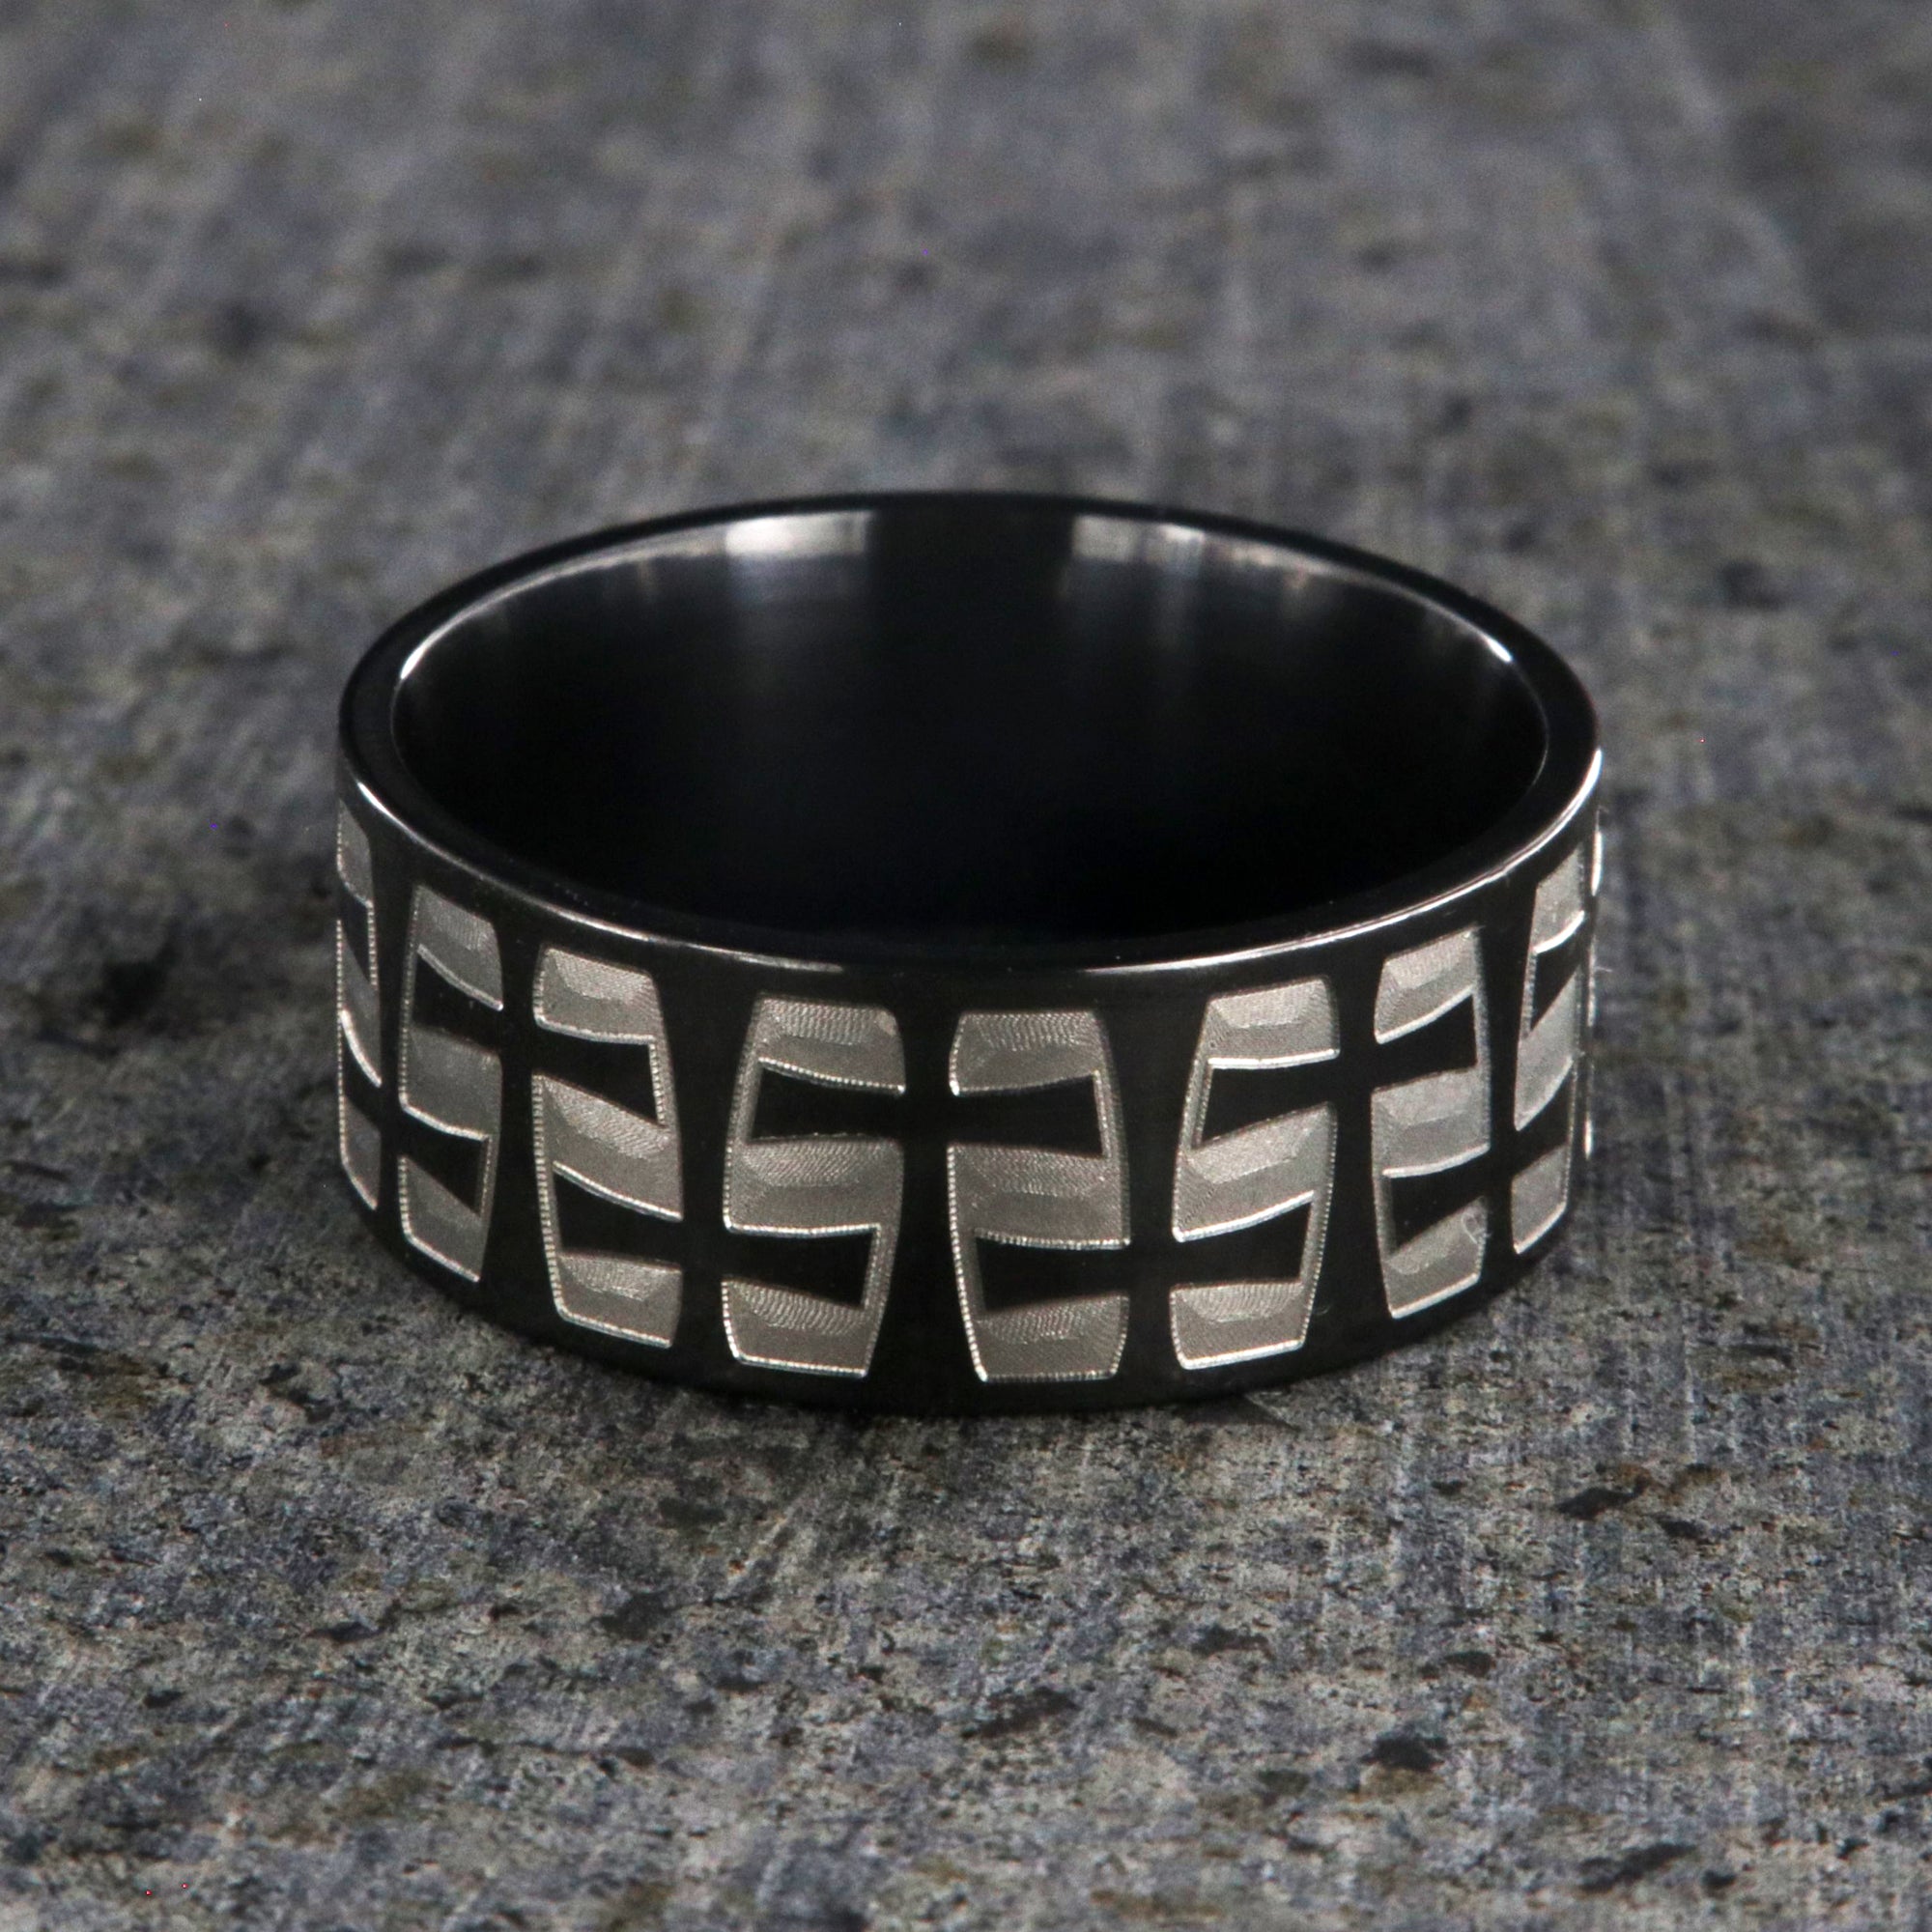 9mm wide black zirconium with a two-tone braided crosses design